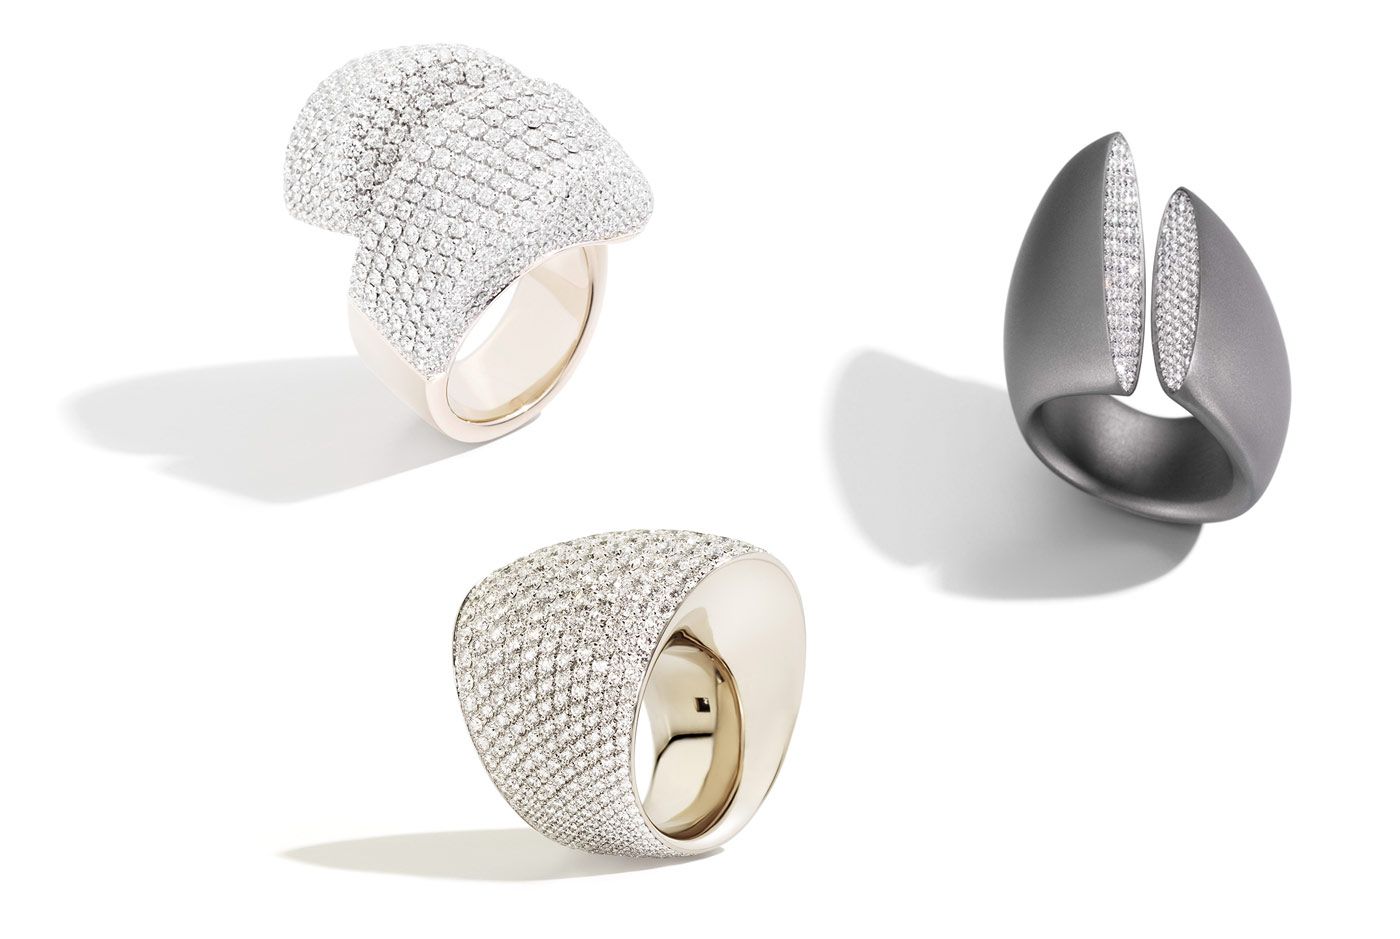 Vhernier pave diamond rings look not less striking than a solitaire